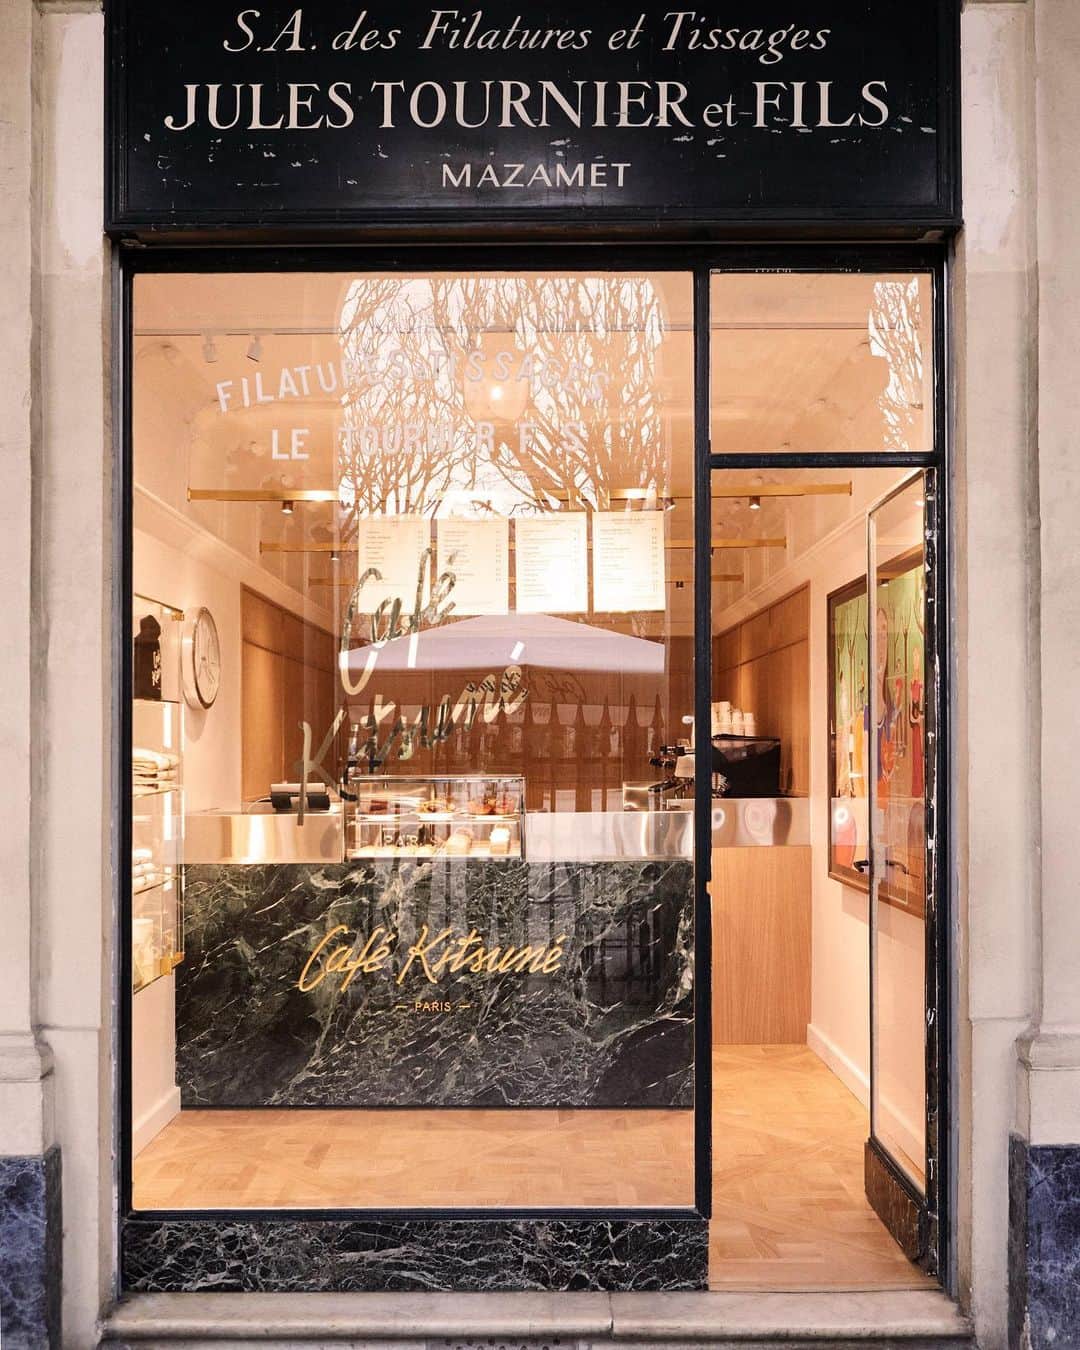 Gildas Loaëcのインスタグラム：「Authentic, Iconic, Parisian: welcome to our newly redesigned #CafeKitsunePalais Royal 🥹🥹 The Palais Royal Gardens are a symbol of Parisian authenticity and refinement. Ten years after its opening, our first historical café is still in its original space under the Gardens' signature 18th century arcades. The new decor is an elegant mix of typical French architectural elements and subtle Japanese influences. The minimalist wood panels that decorates the walls seamlessly blend with the Versailles parquet floors and intricate ceiling moldings, carefully restored. The green marble counter features a golden Café Kitsuné logo engraved on its front. Whether it's for a coffee to go or 'en terrasse, visit us to enjoy your favorite specialty drinks and pastries in a magical atmosphere, gazing over the garden's beautiful landscape. 👉🏻 Café Kitsuné Palais Royal 51 Galerie Montpensier, 75001 Paris Monday-Sunday: 9:30am-7pm #CafeKitsune #CK #ParisCafe #PalaisRoyal #ParisCoffeeShops」